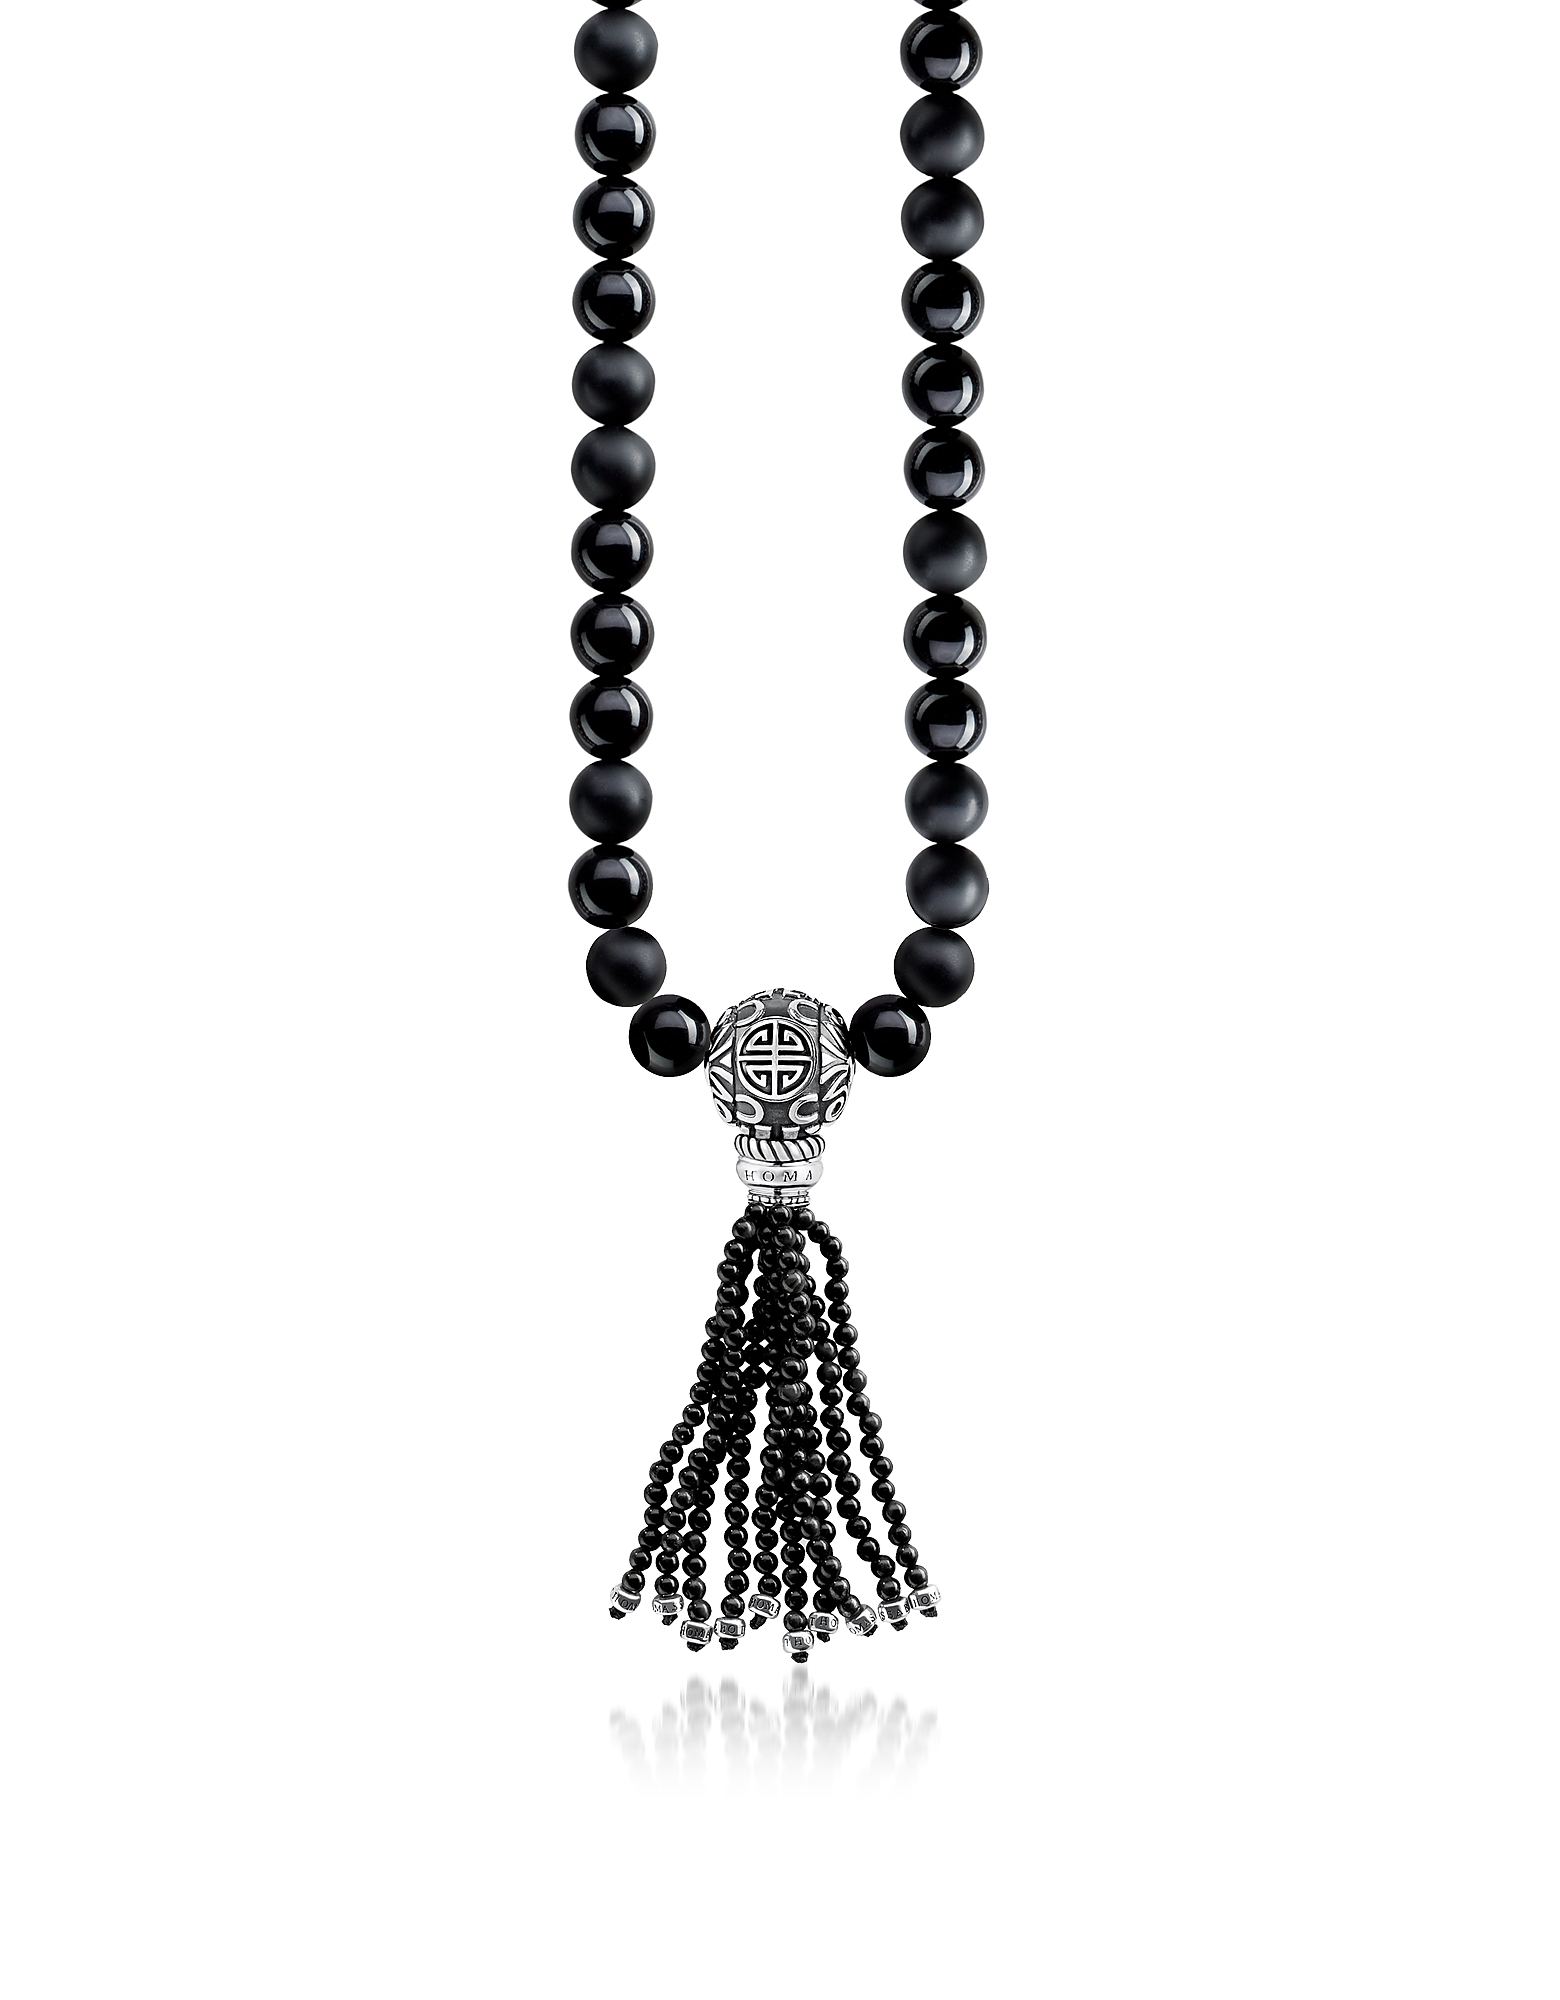 

Power Necklace Black Sterling Silver Men's Long Necklace w/Obsidian Matt & Polished Beads and Tassel